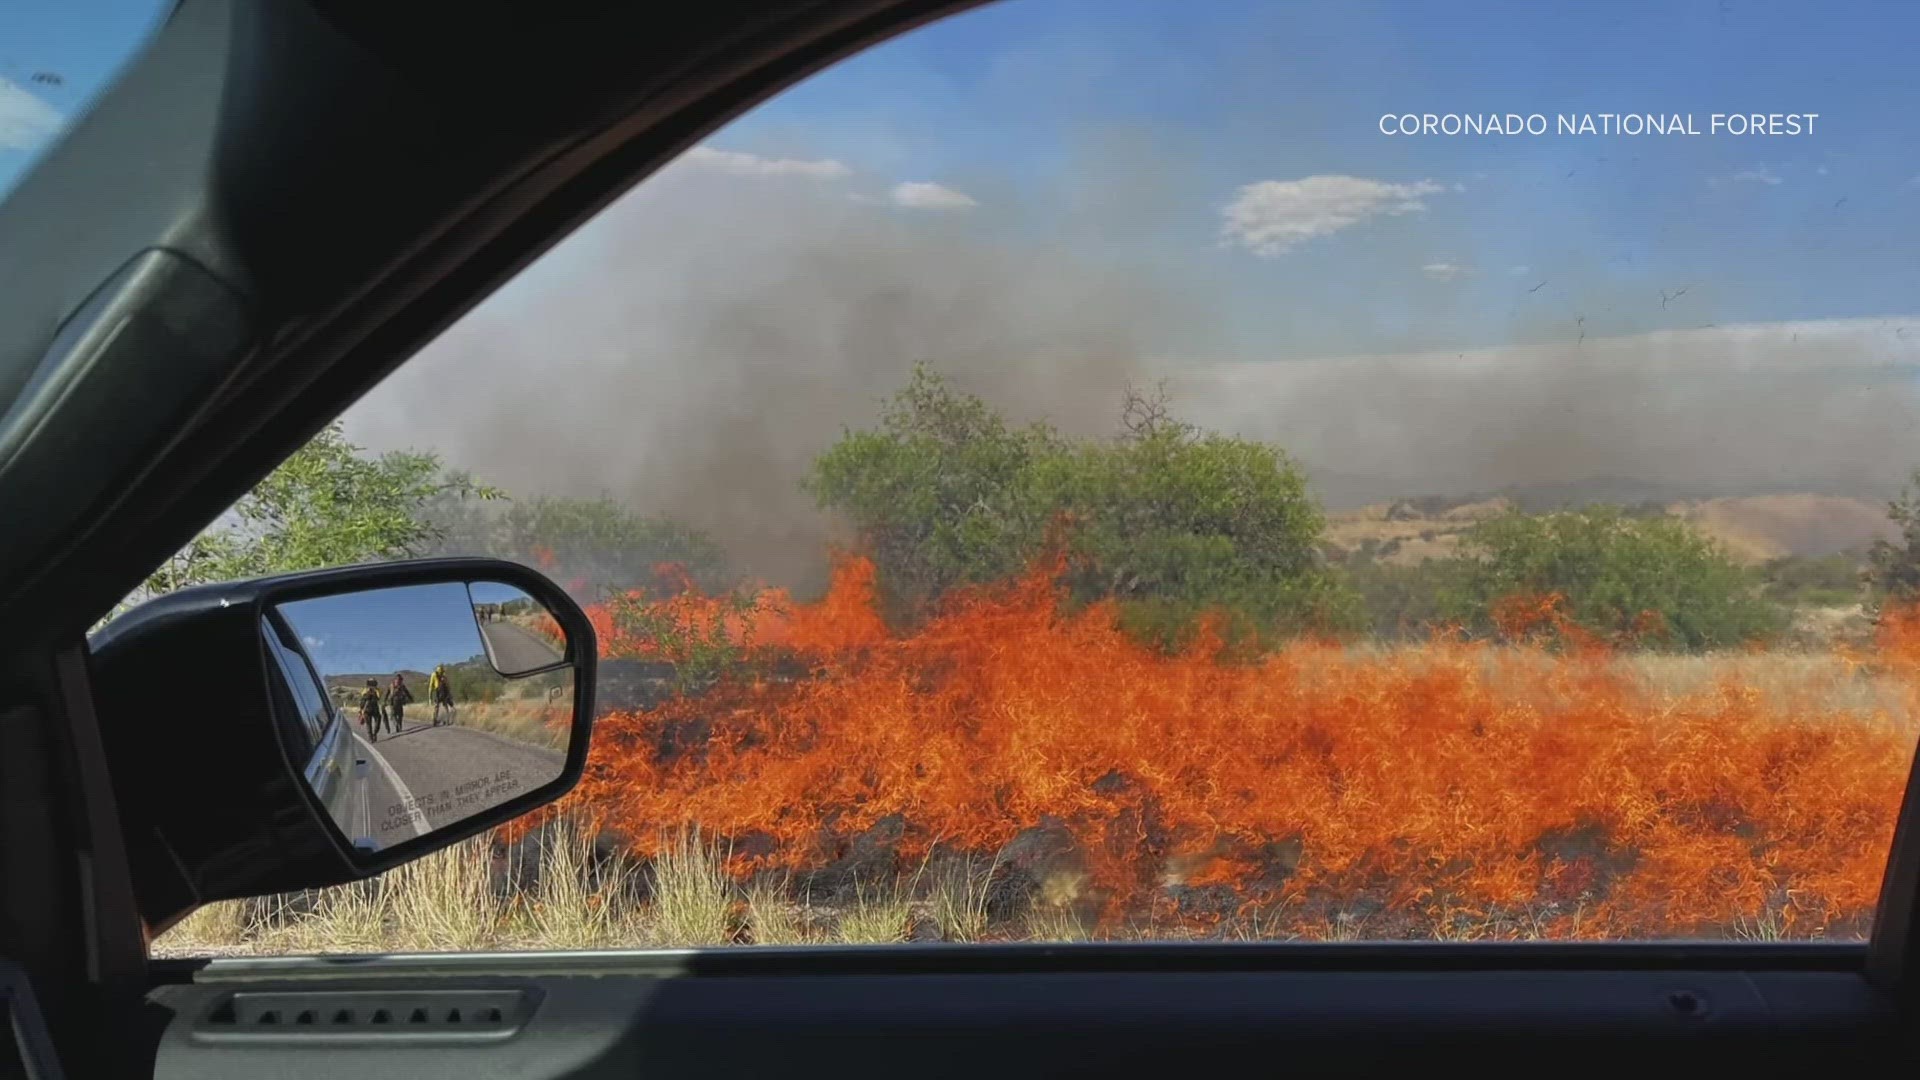 Elevated winds, dry conditions and low humidity are all contributing factors to this season's wildfires.